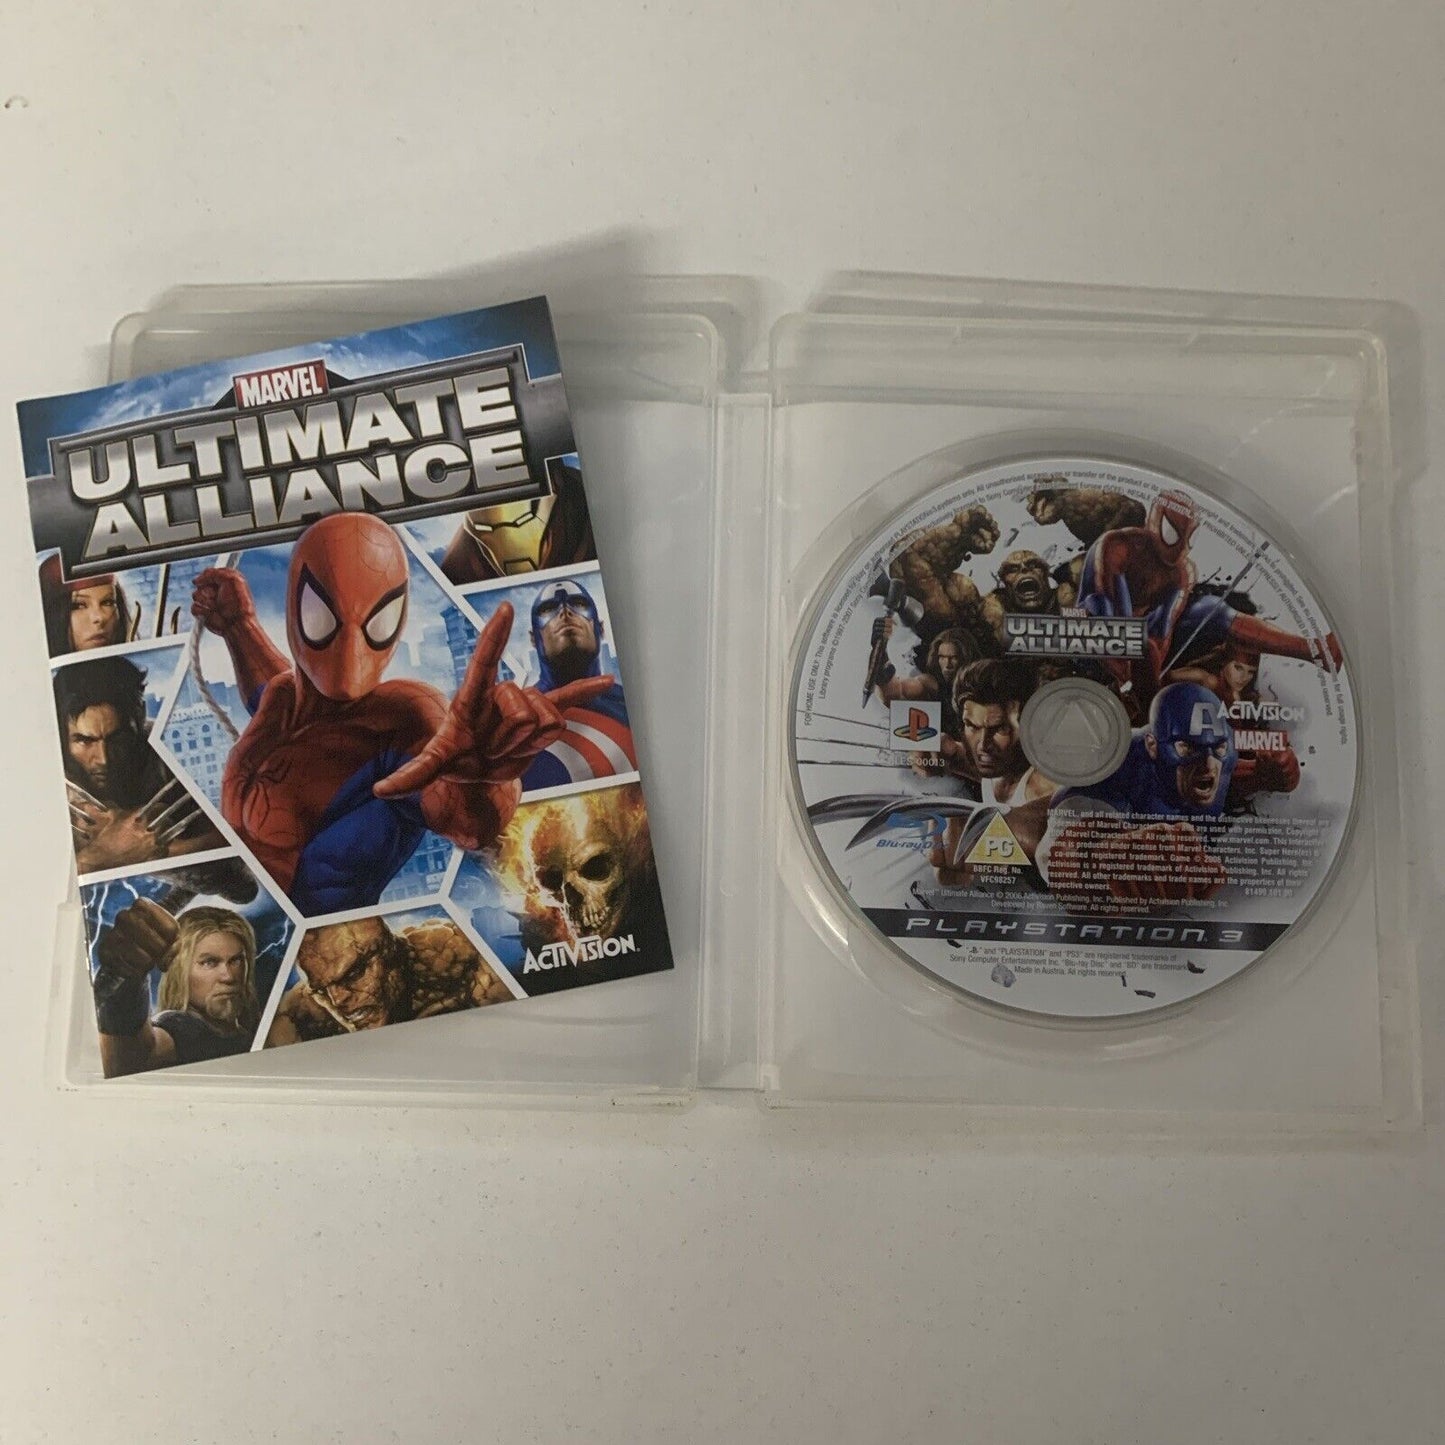 Marvel Ultimate Alliance PlayStation 3 PS3 Game